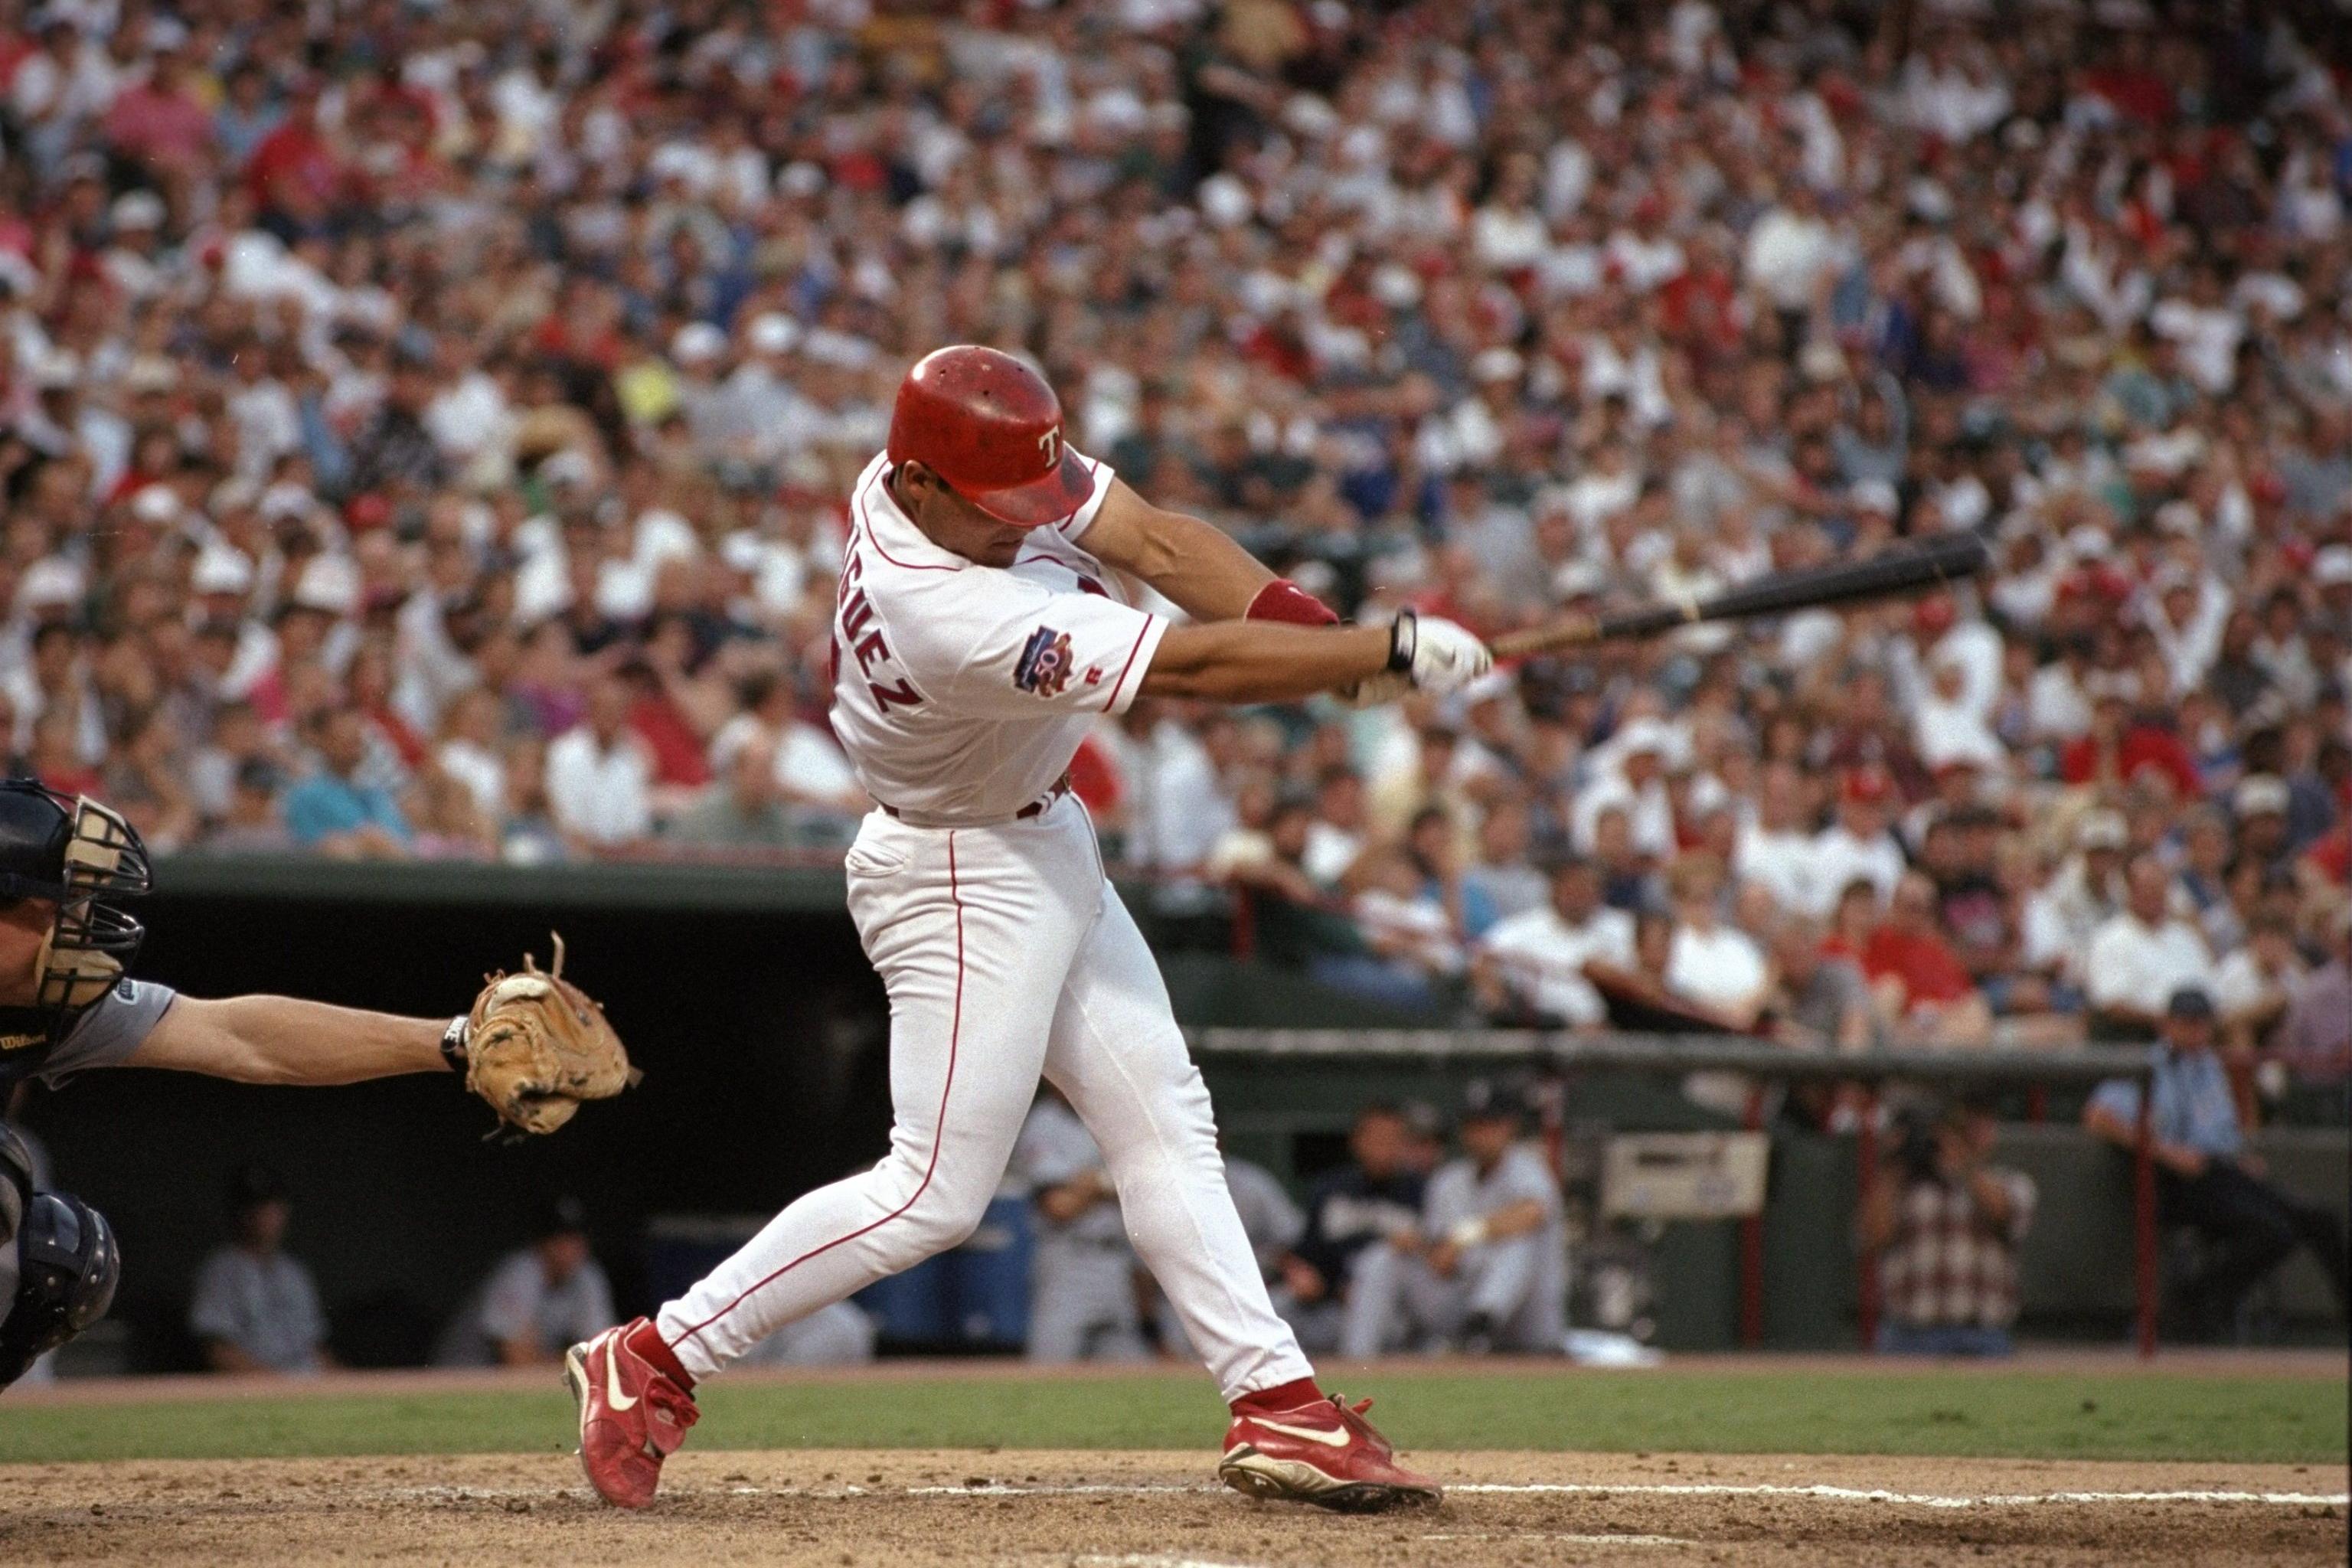 10 things you might not know about Pudge Rodriguez